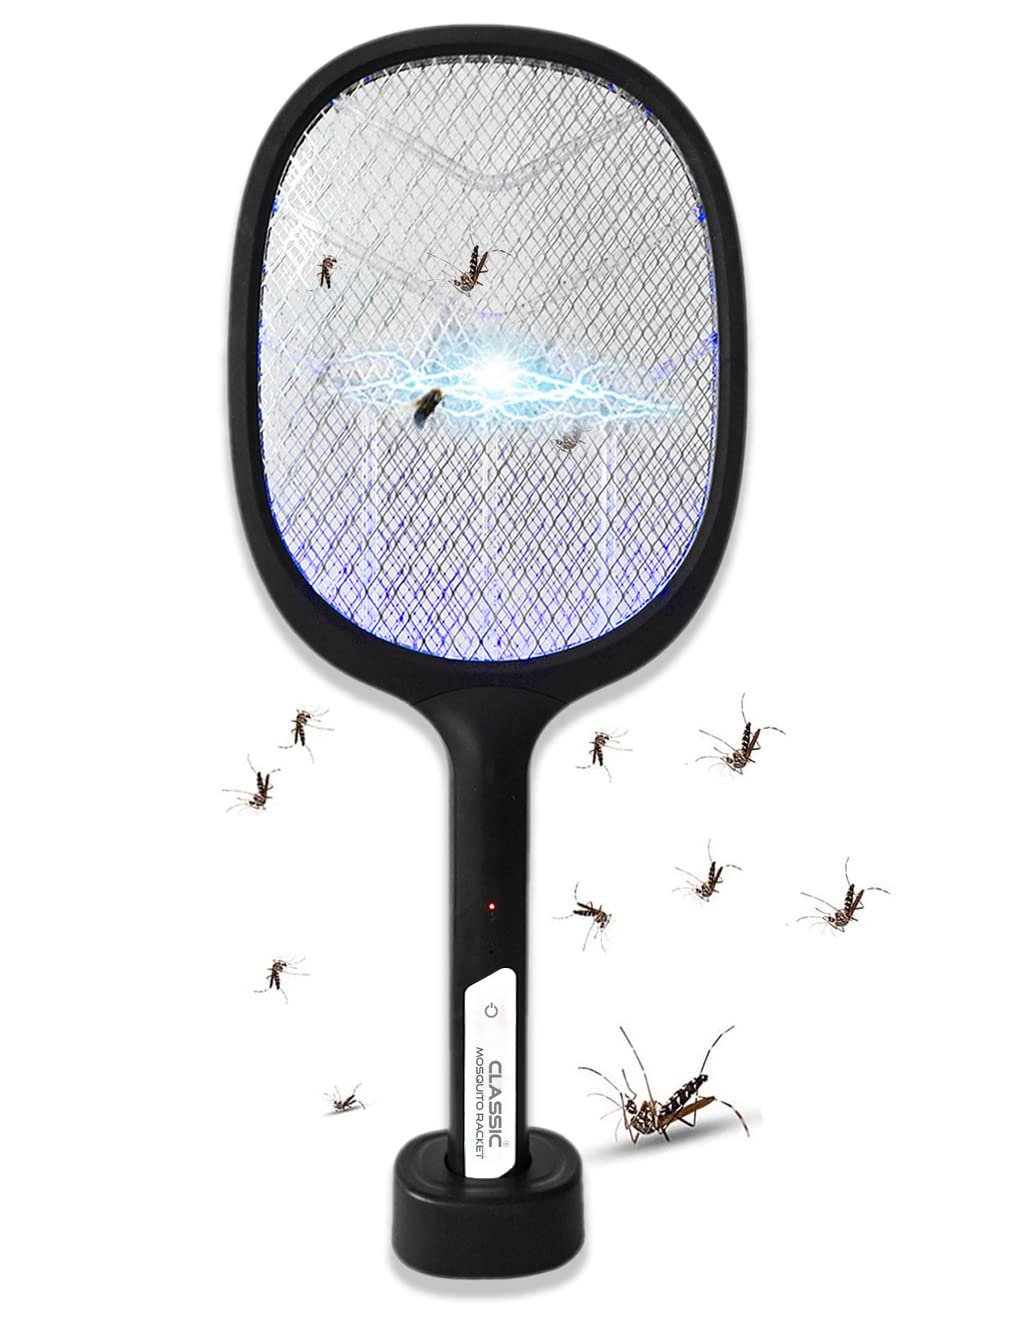 Classic Mosquito Racket With Rechargeable Insect Killer, Mosquito Bat With Led Lights, 1200Mah Lithium Ion Battery, Made In India (Black)